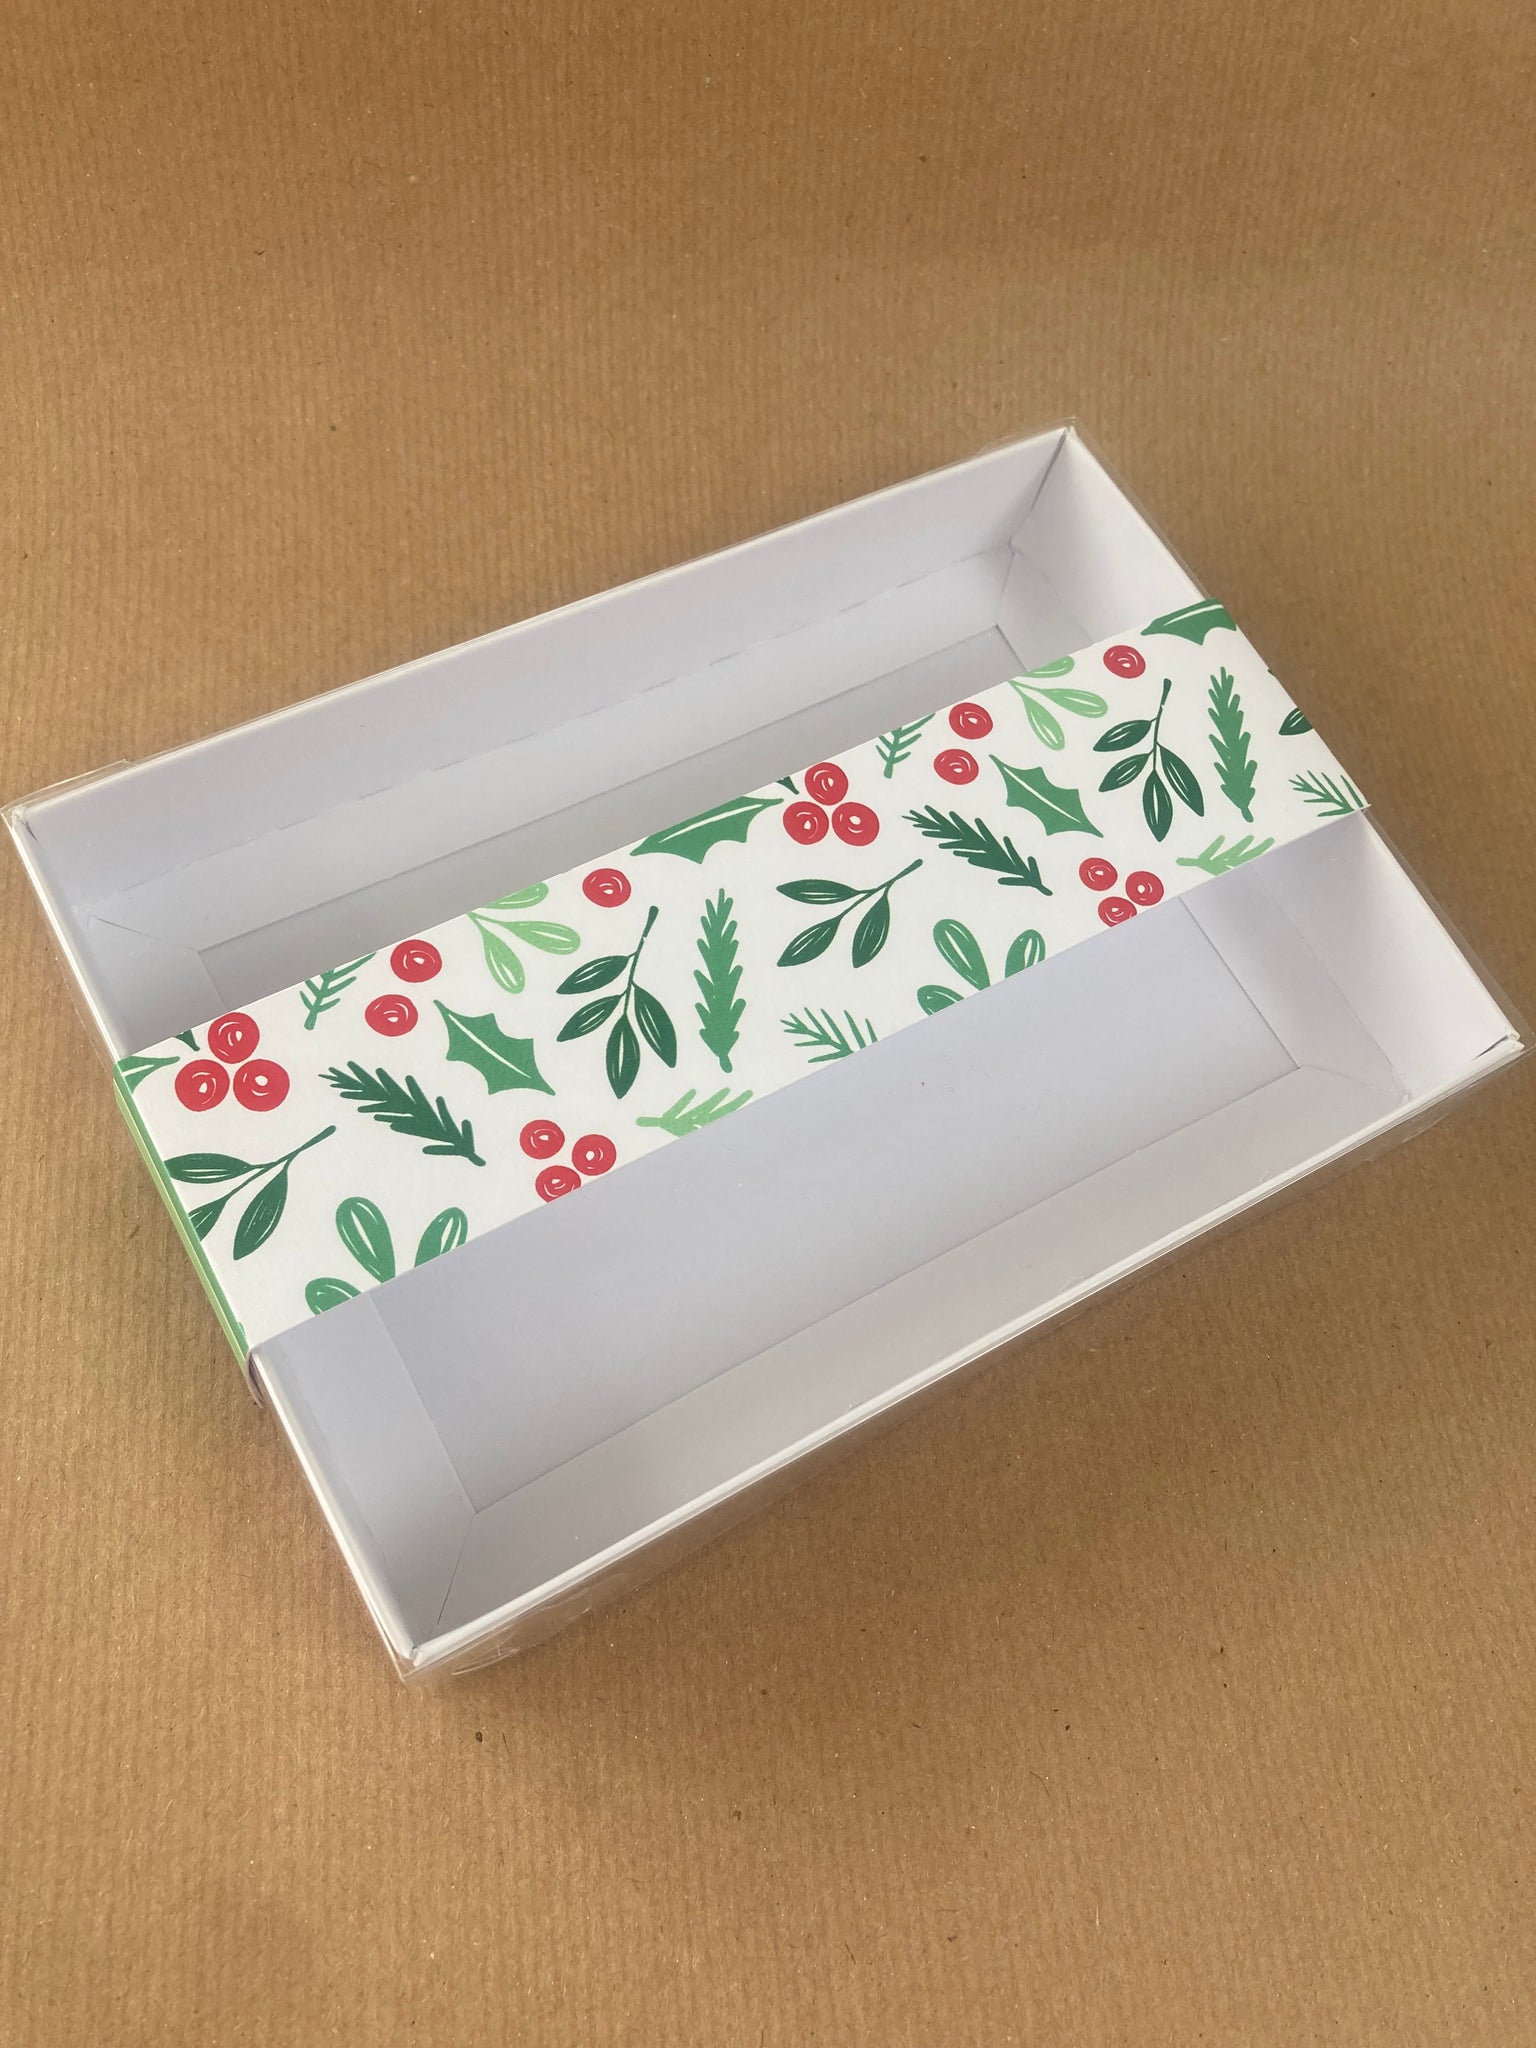 HOLLY & BERRIES CLEAR LID GIFT BOX 168 X 115 X 26mm